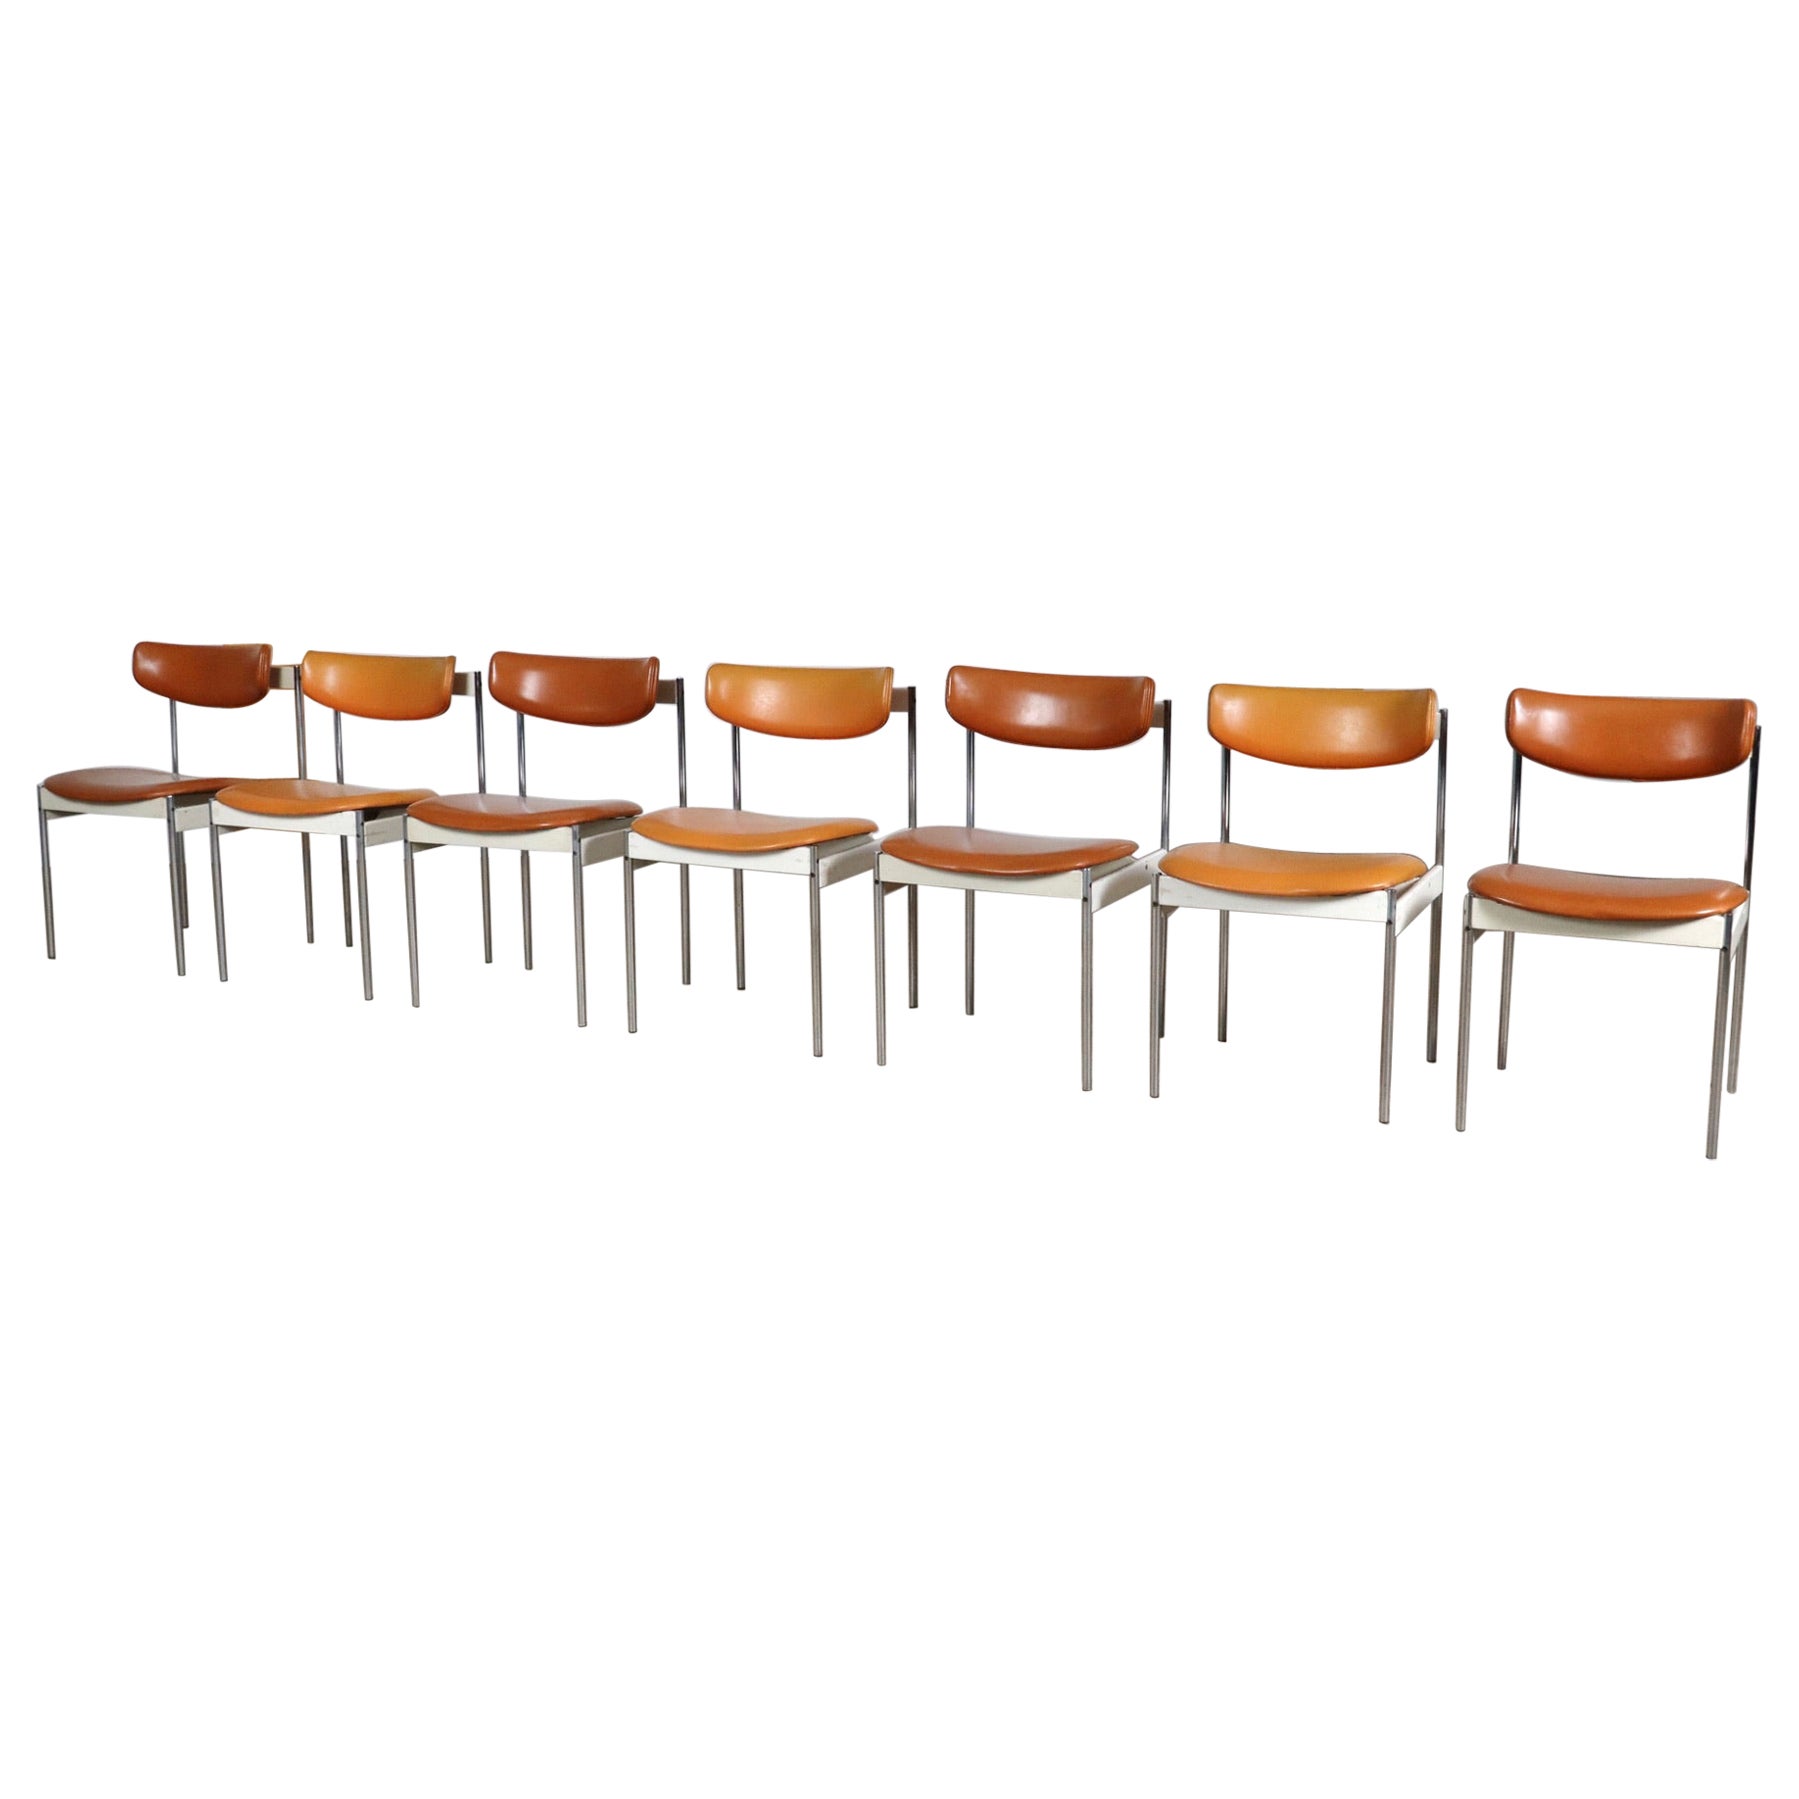 Set of 7 dining chairs by C. Denekamp for Thereca, Netherlands 1960s